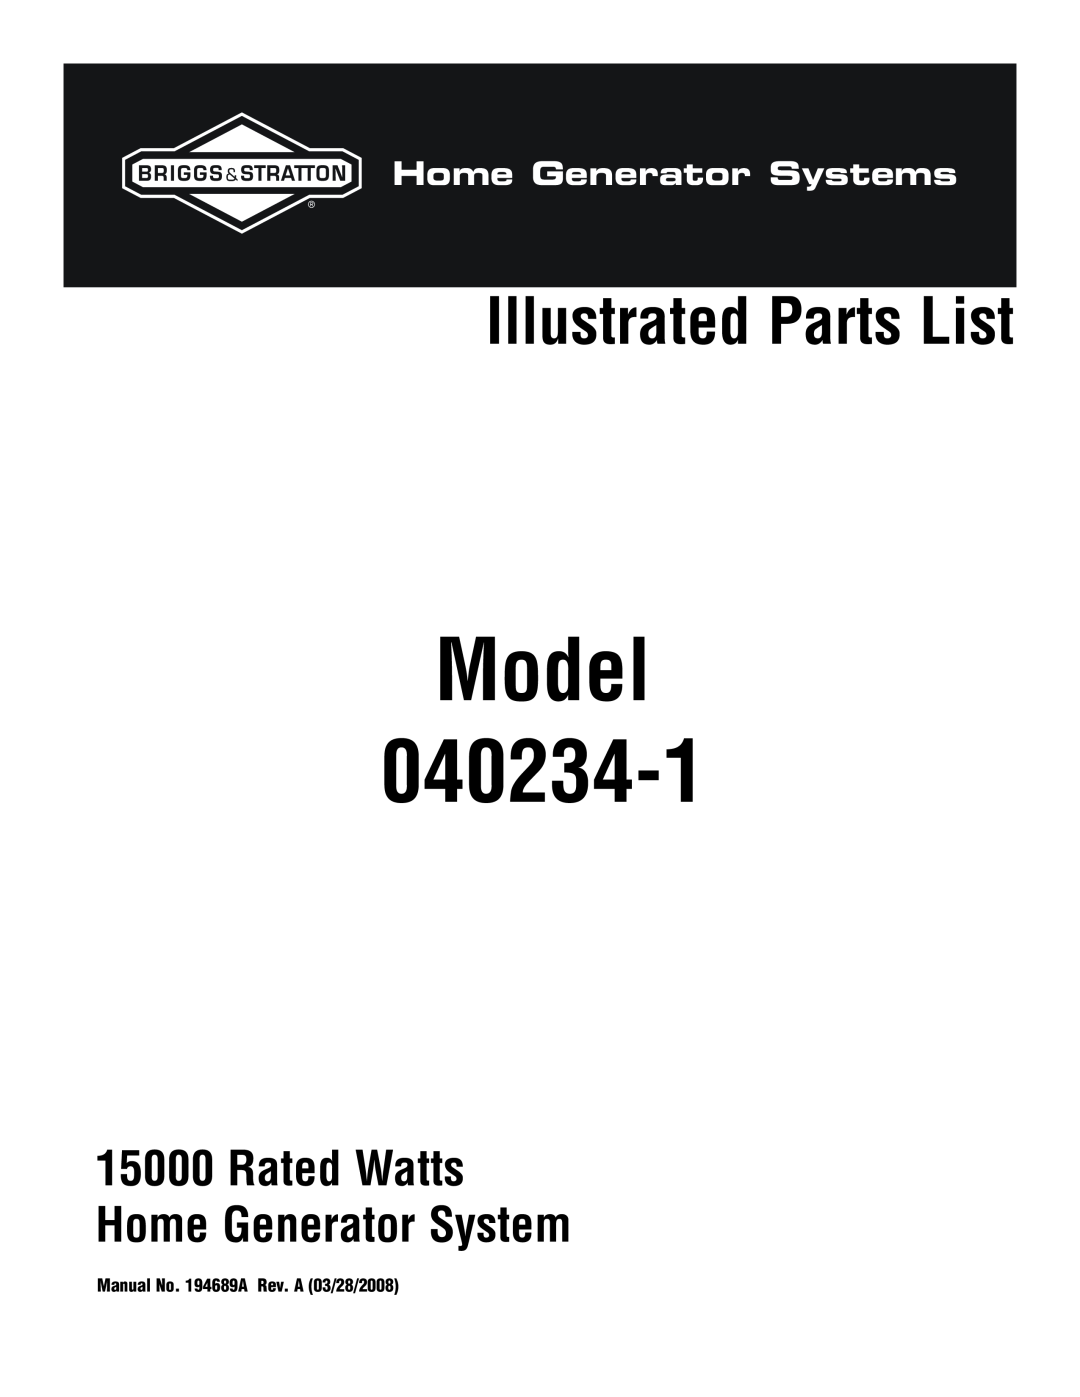 Briggs & Stratton 040234-1 manual Model, Illustrated Parts List, Rated Watts Home Generator System, Home Generator Systems 